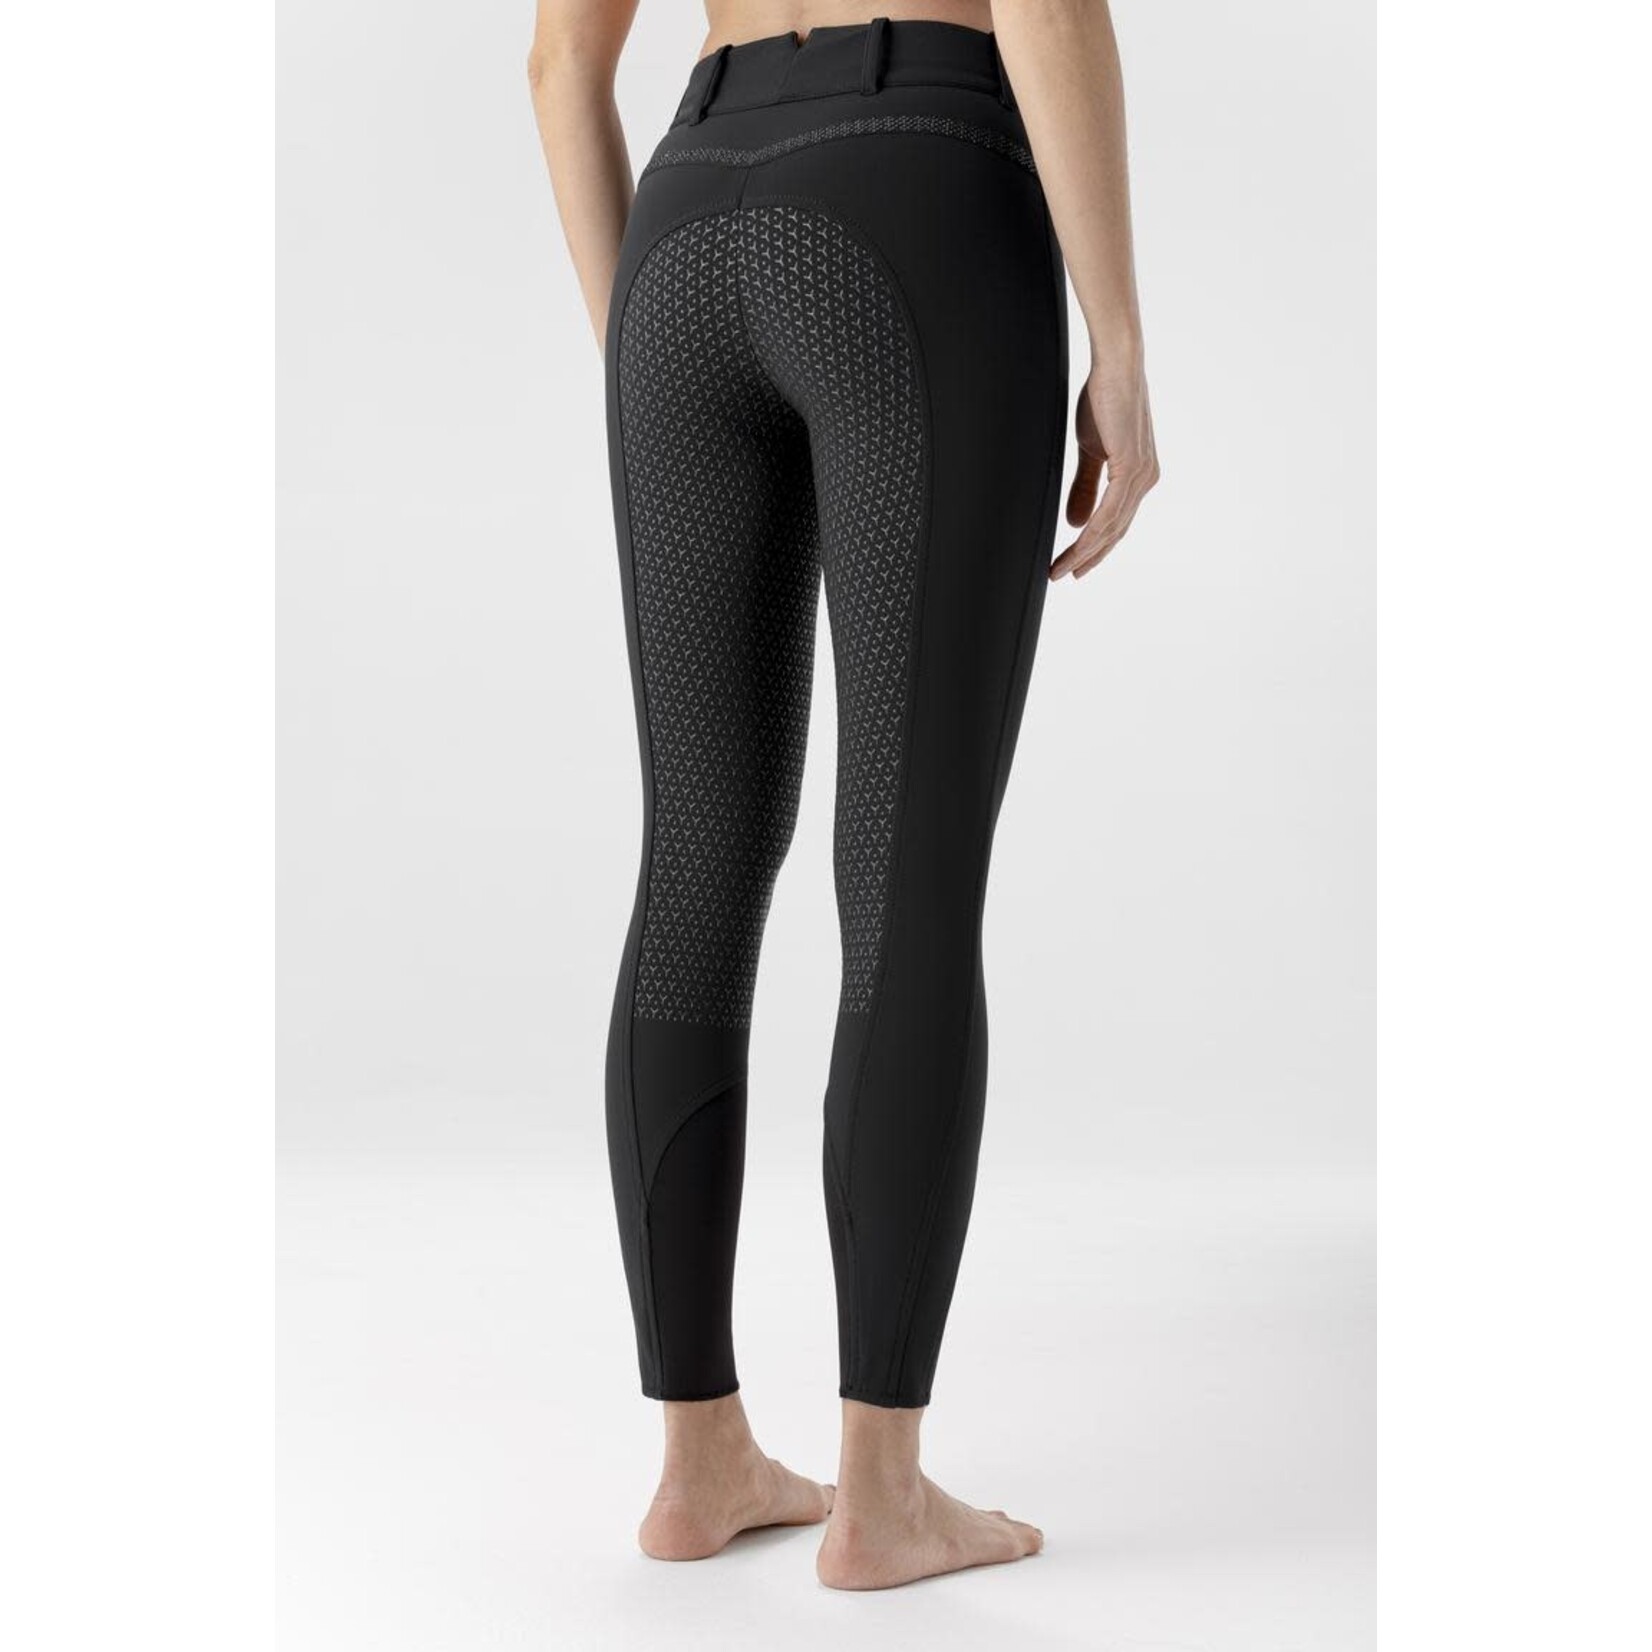 Equiline Equiline Nellyfh B-move dual tech micro fleece women's full grip breeches